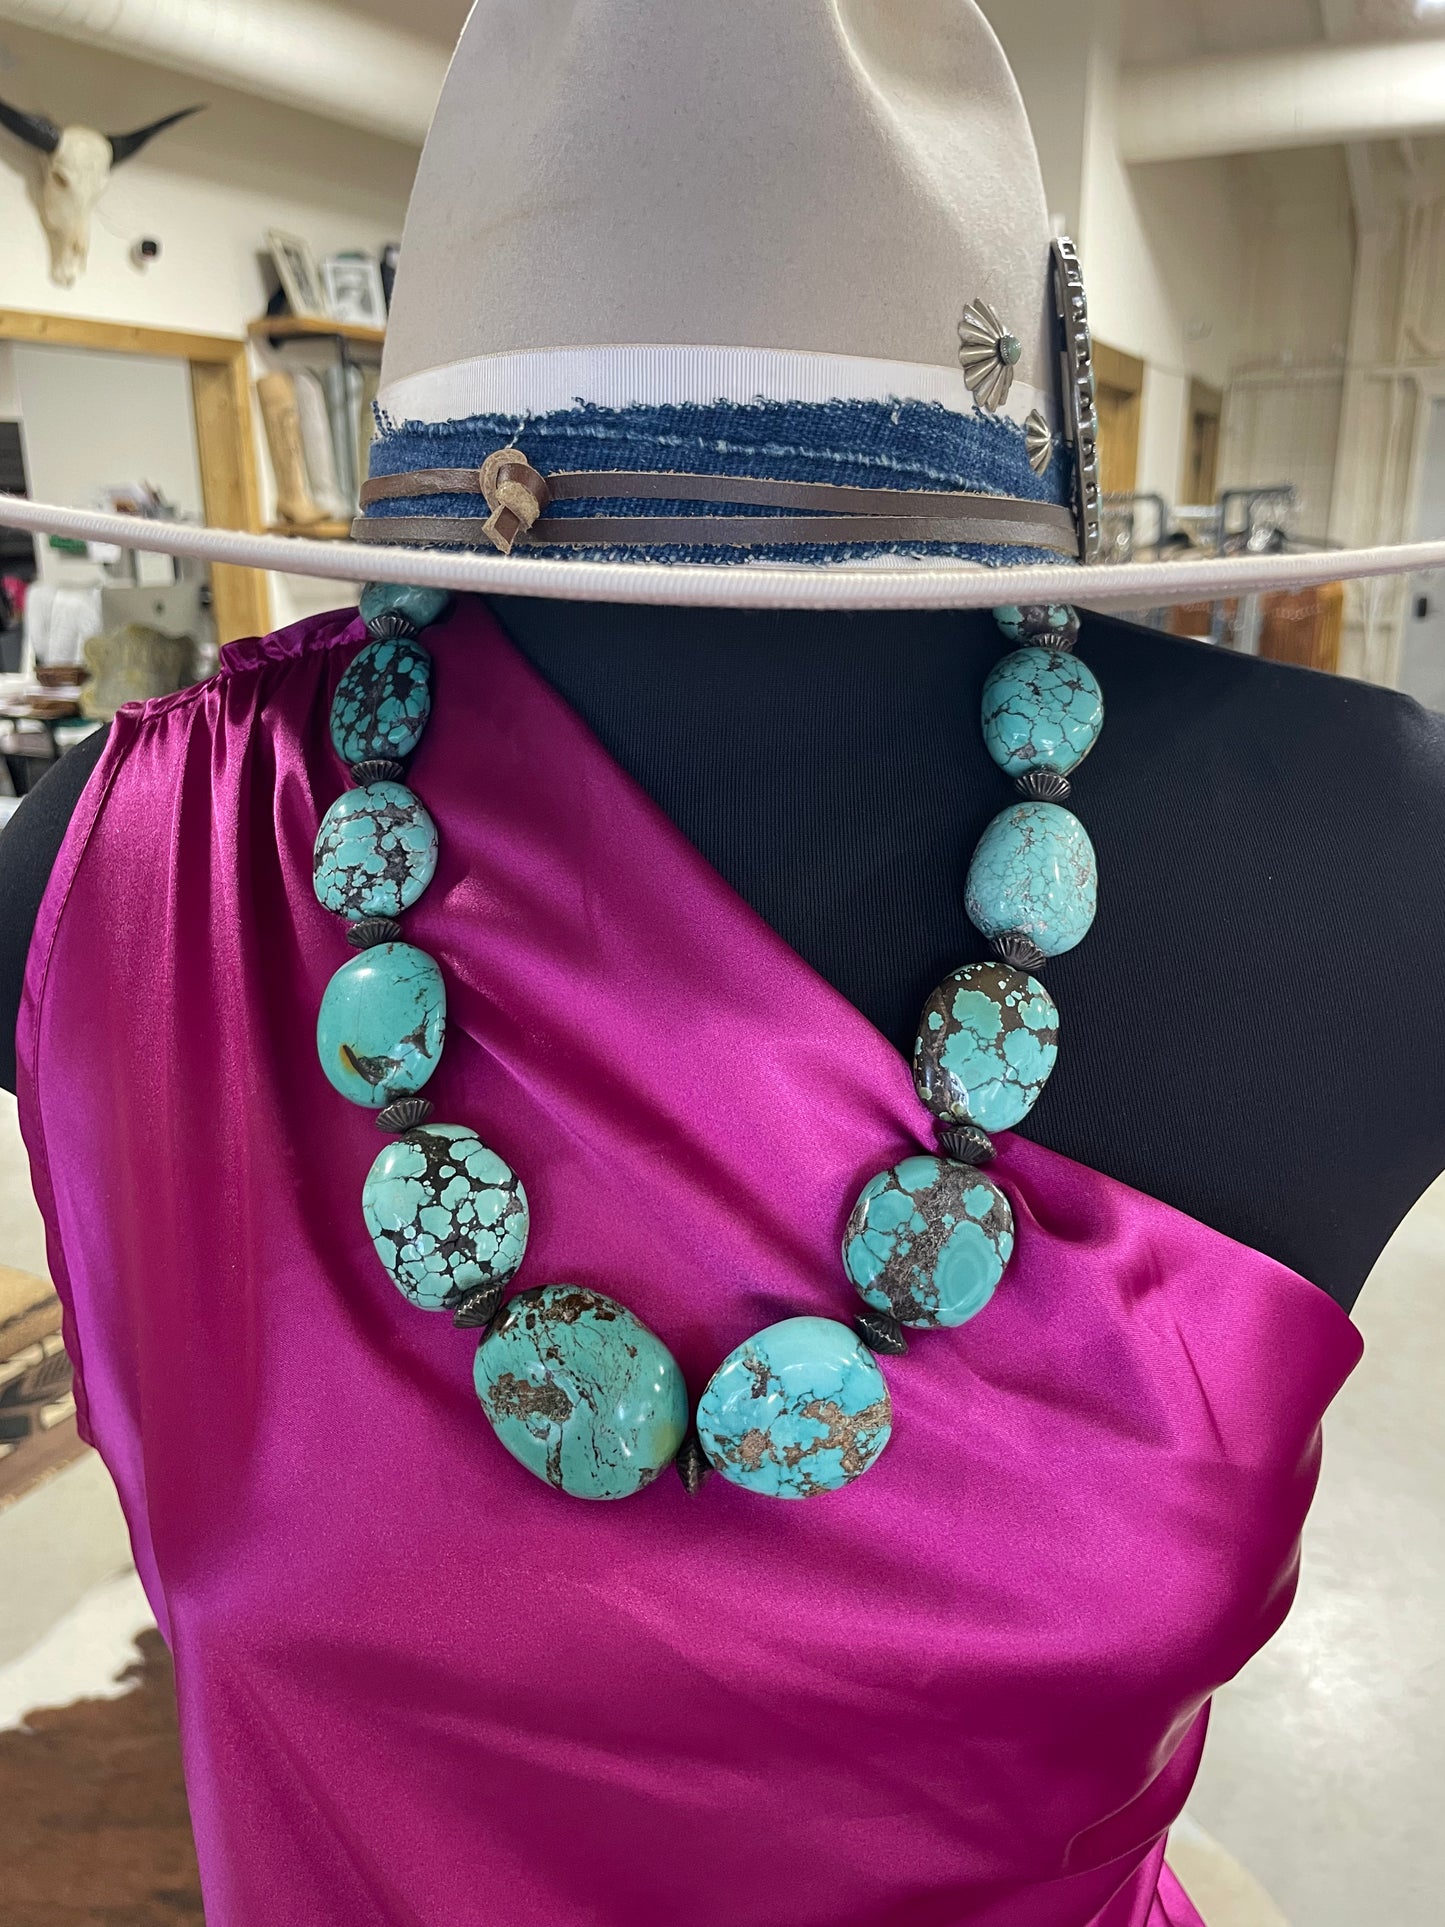 Blue Moon Turquoise Necklace